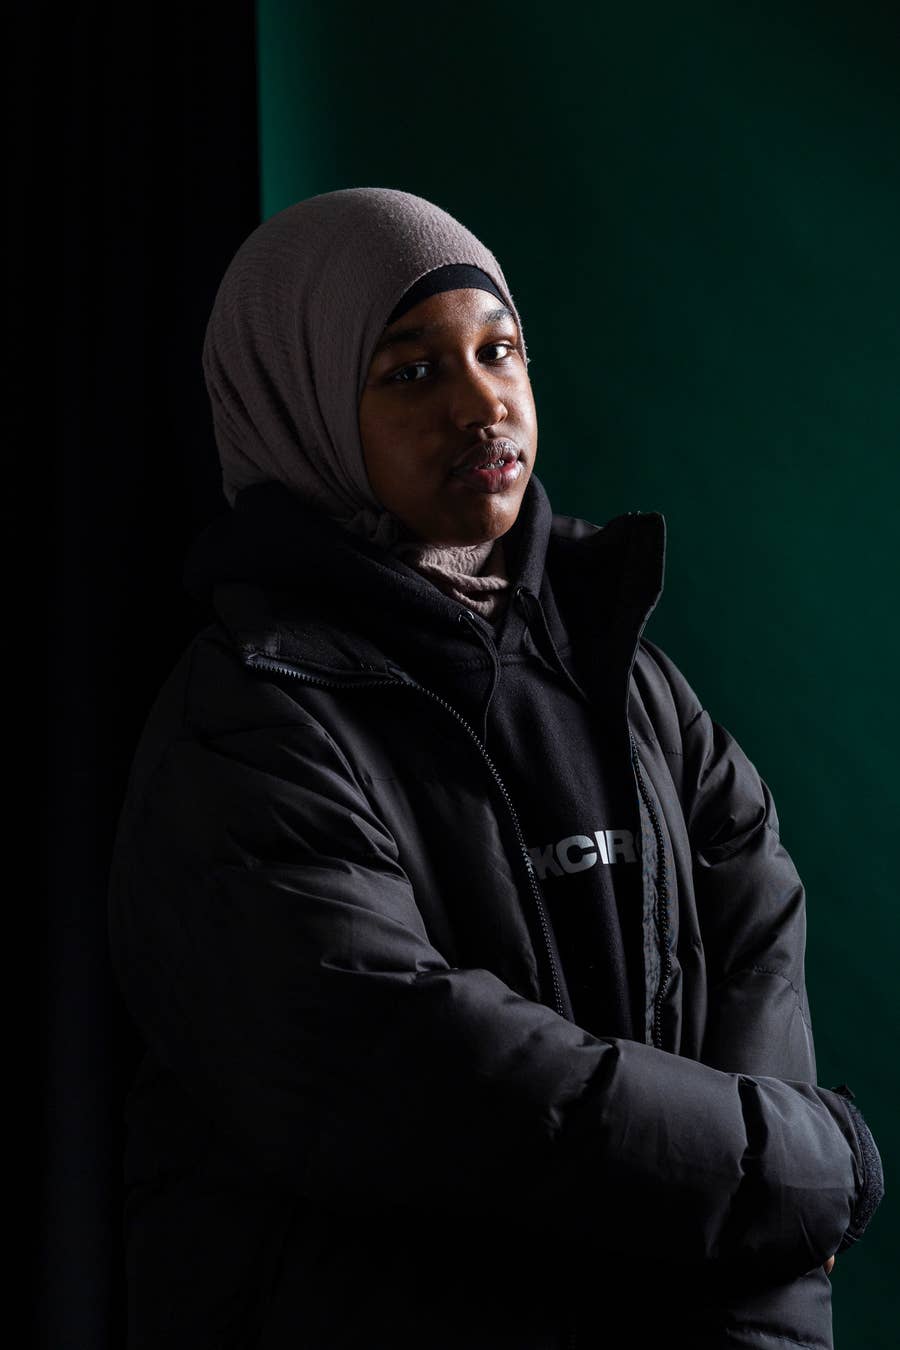 Somali Porn From Ikran - This Teen Set Up A Record Label For Birmingham